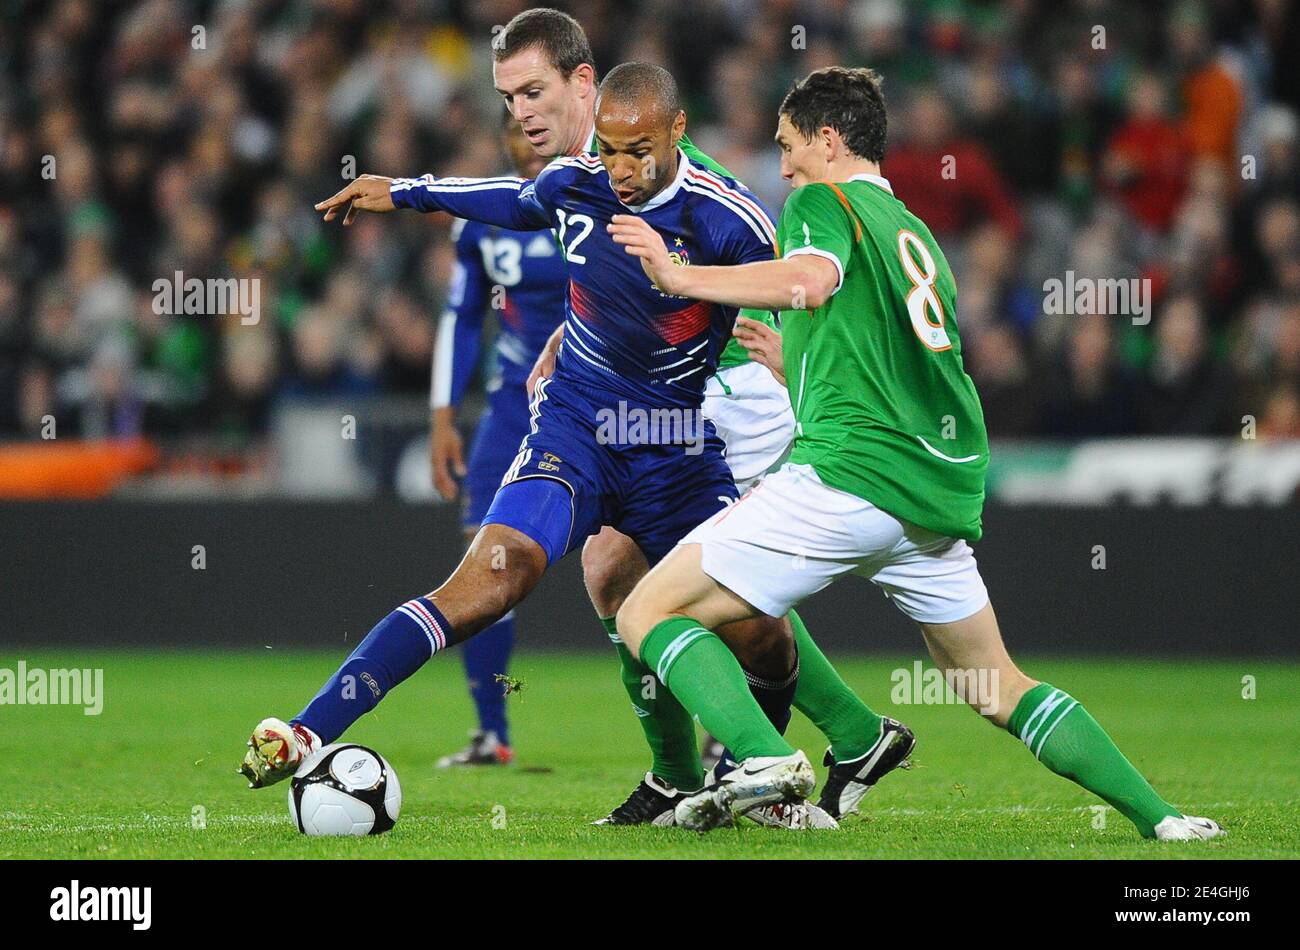 France's Thierry Henry fights for the ball with Ireland's Keith Andrews during the World Cup 2010 Qualifying Play off soccer match, Ireland vs France at Croke Park stadium in Dublin, Ireland on November 14, 2009. France won 1-0. Photo by Steeve McMay/ABACAPRESS.COM Stock Photo